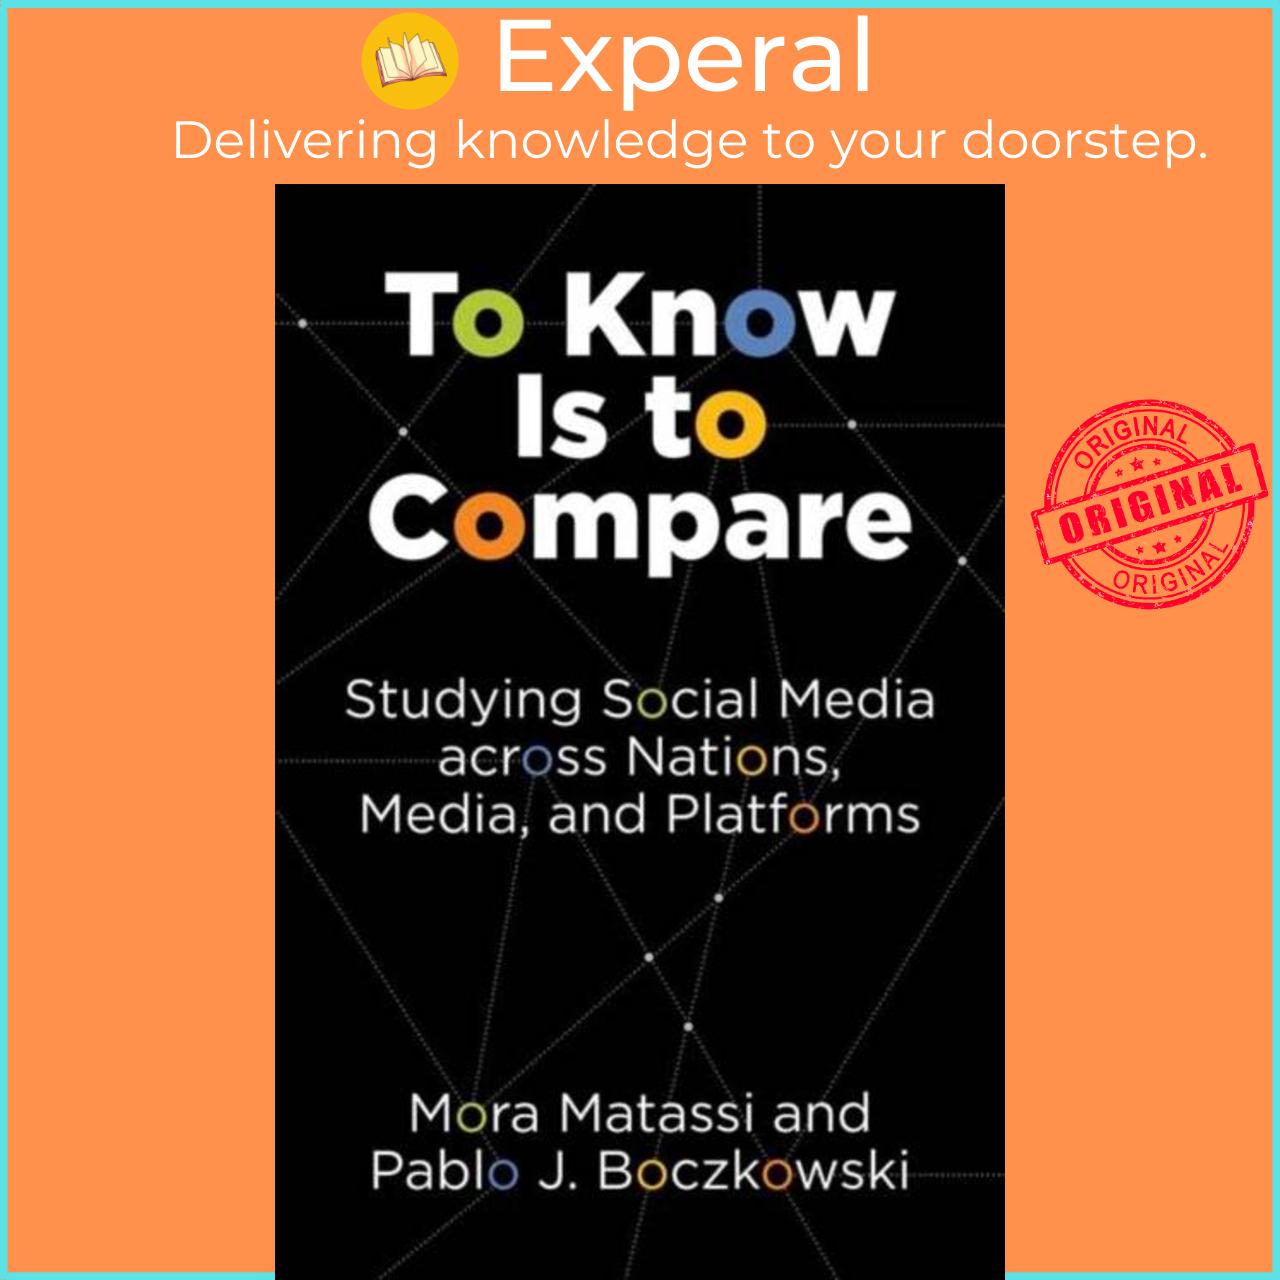 Hình ảnh Sách - To Know Is to Compare - Studying Social Media across Nations, Medi by Pablo J. Boczkowski (UK edition, paperback)